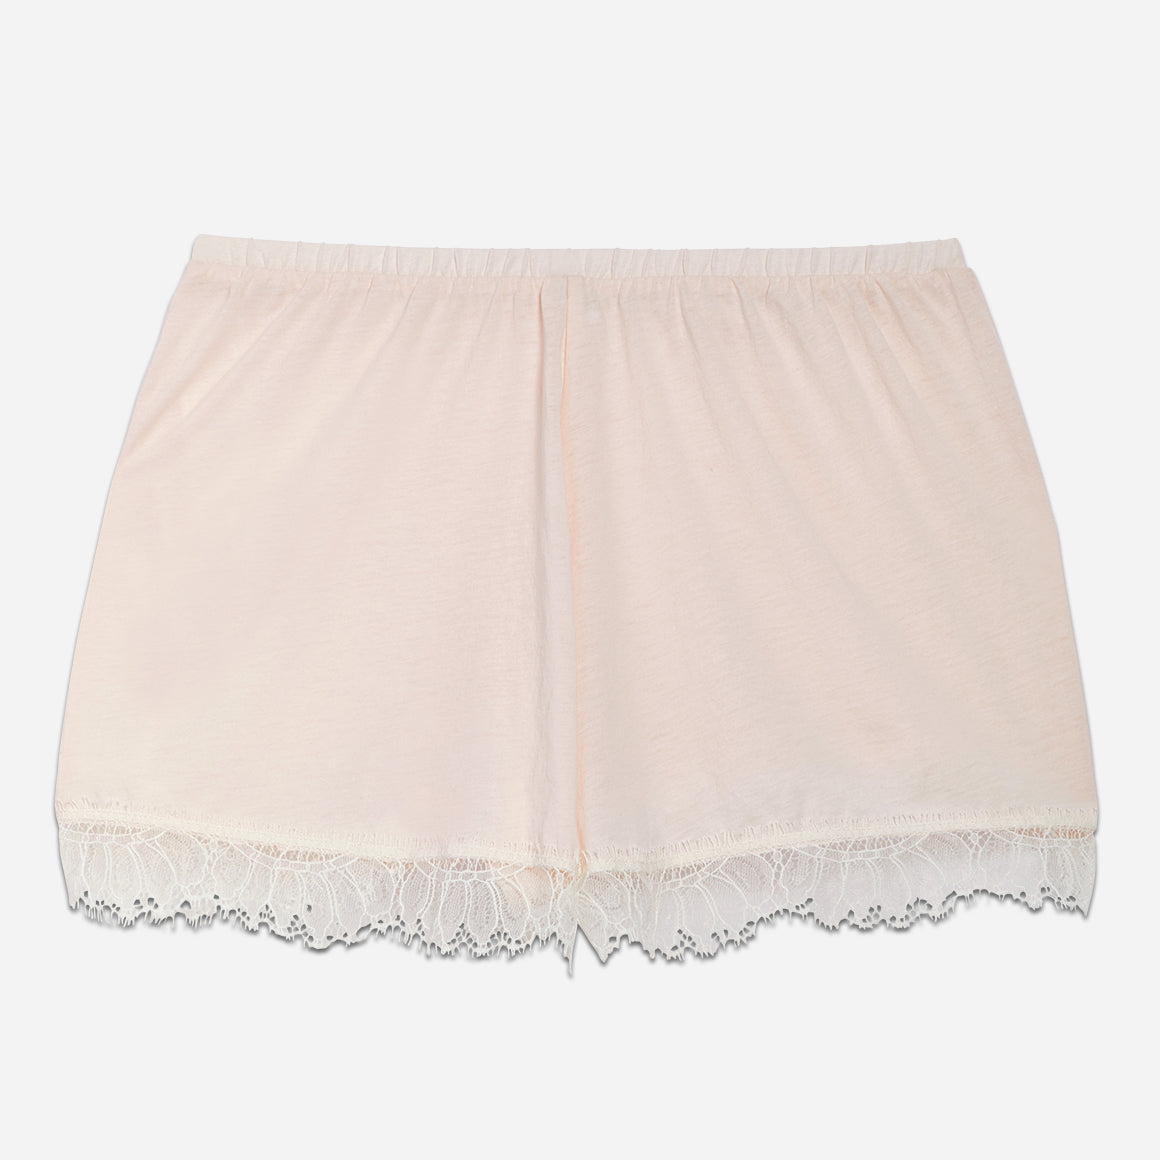 These pj shorts have a relaxed fit that allows for effortless movement, while the elastic waistband ensures a secure and personalized fit. The lace trim on the hem provides a feminine touch to this loungewear staple. 